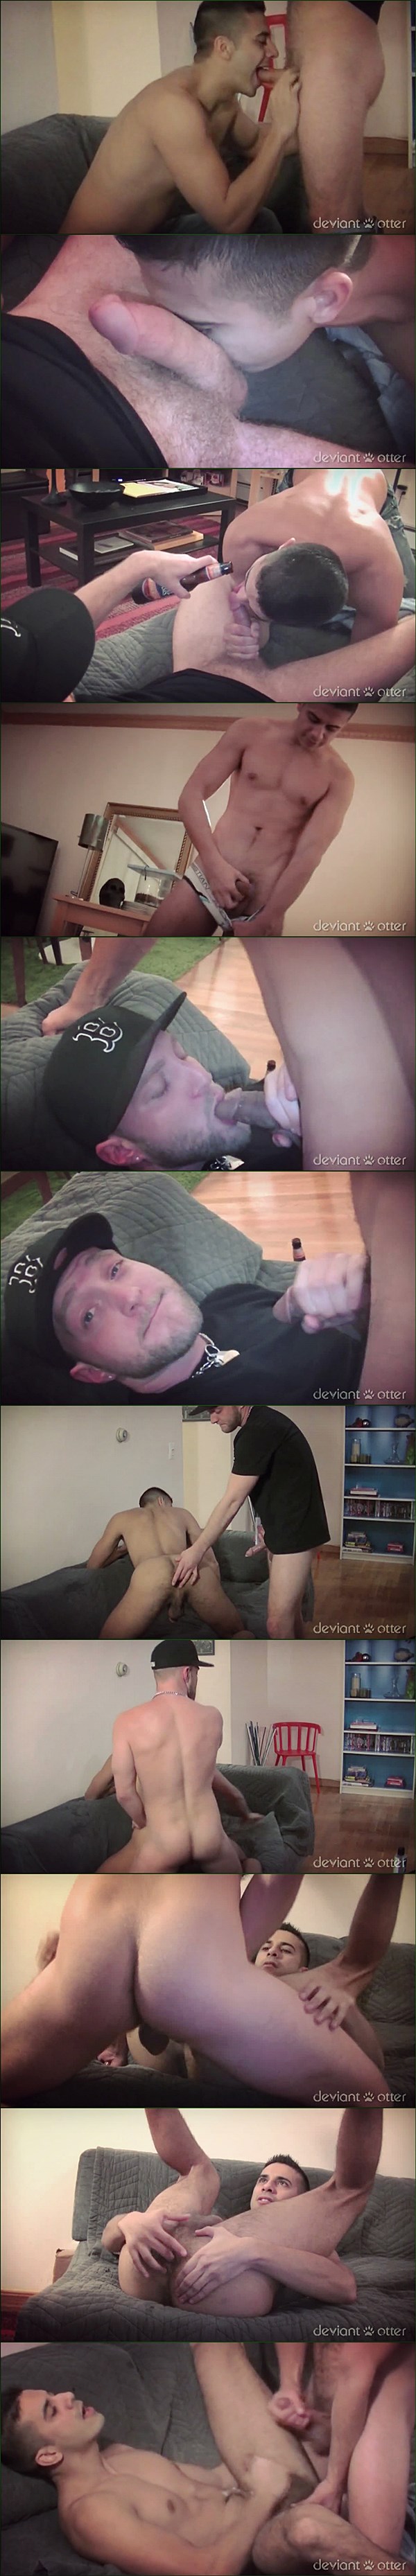 Devian Totter slams a handsome young man like crazy in An Insatiable Bottom at Deviantotter 02